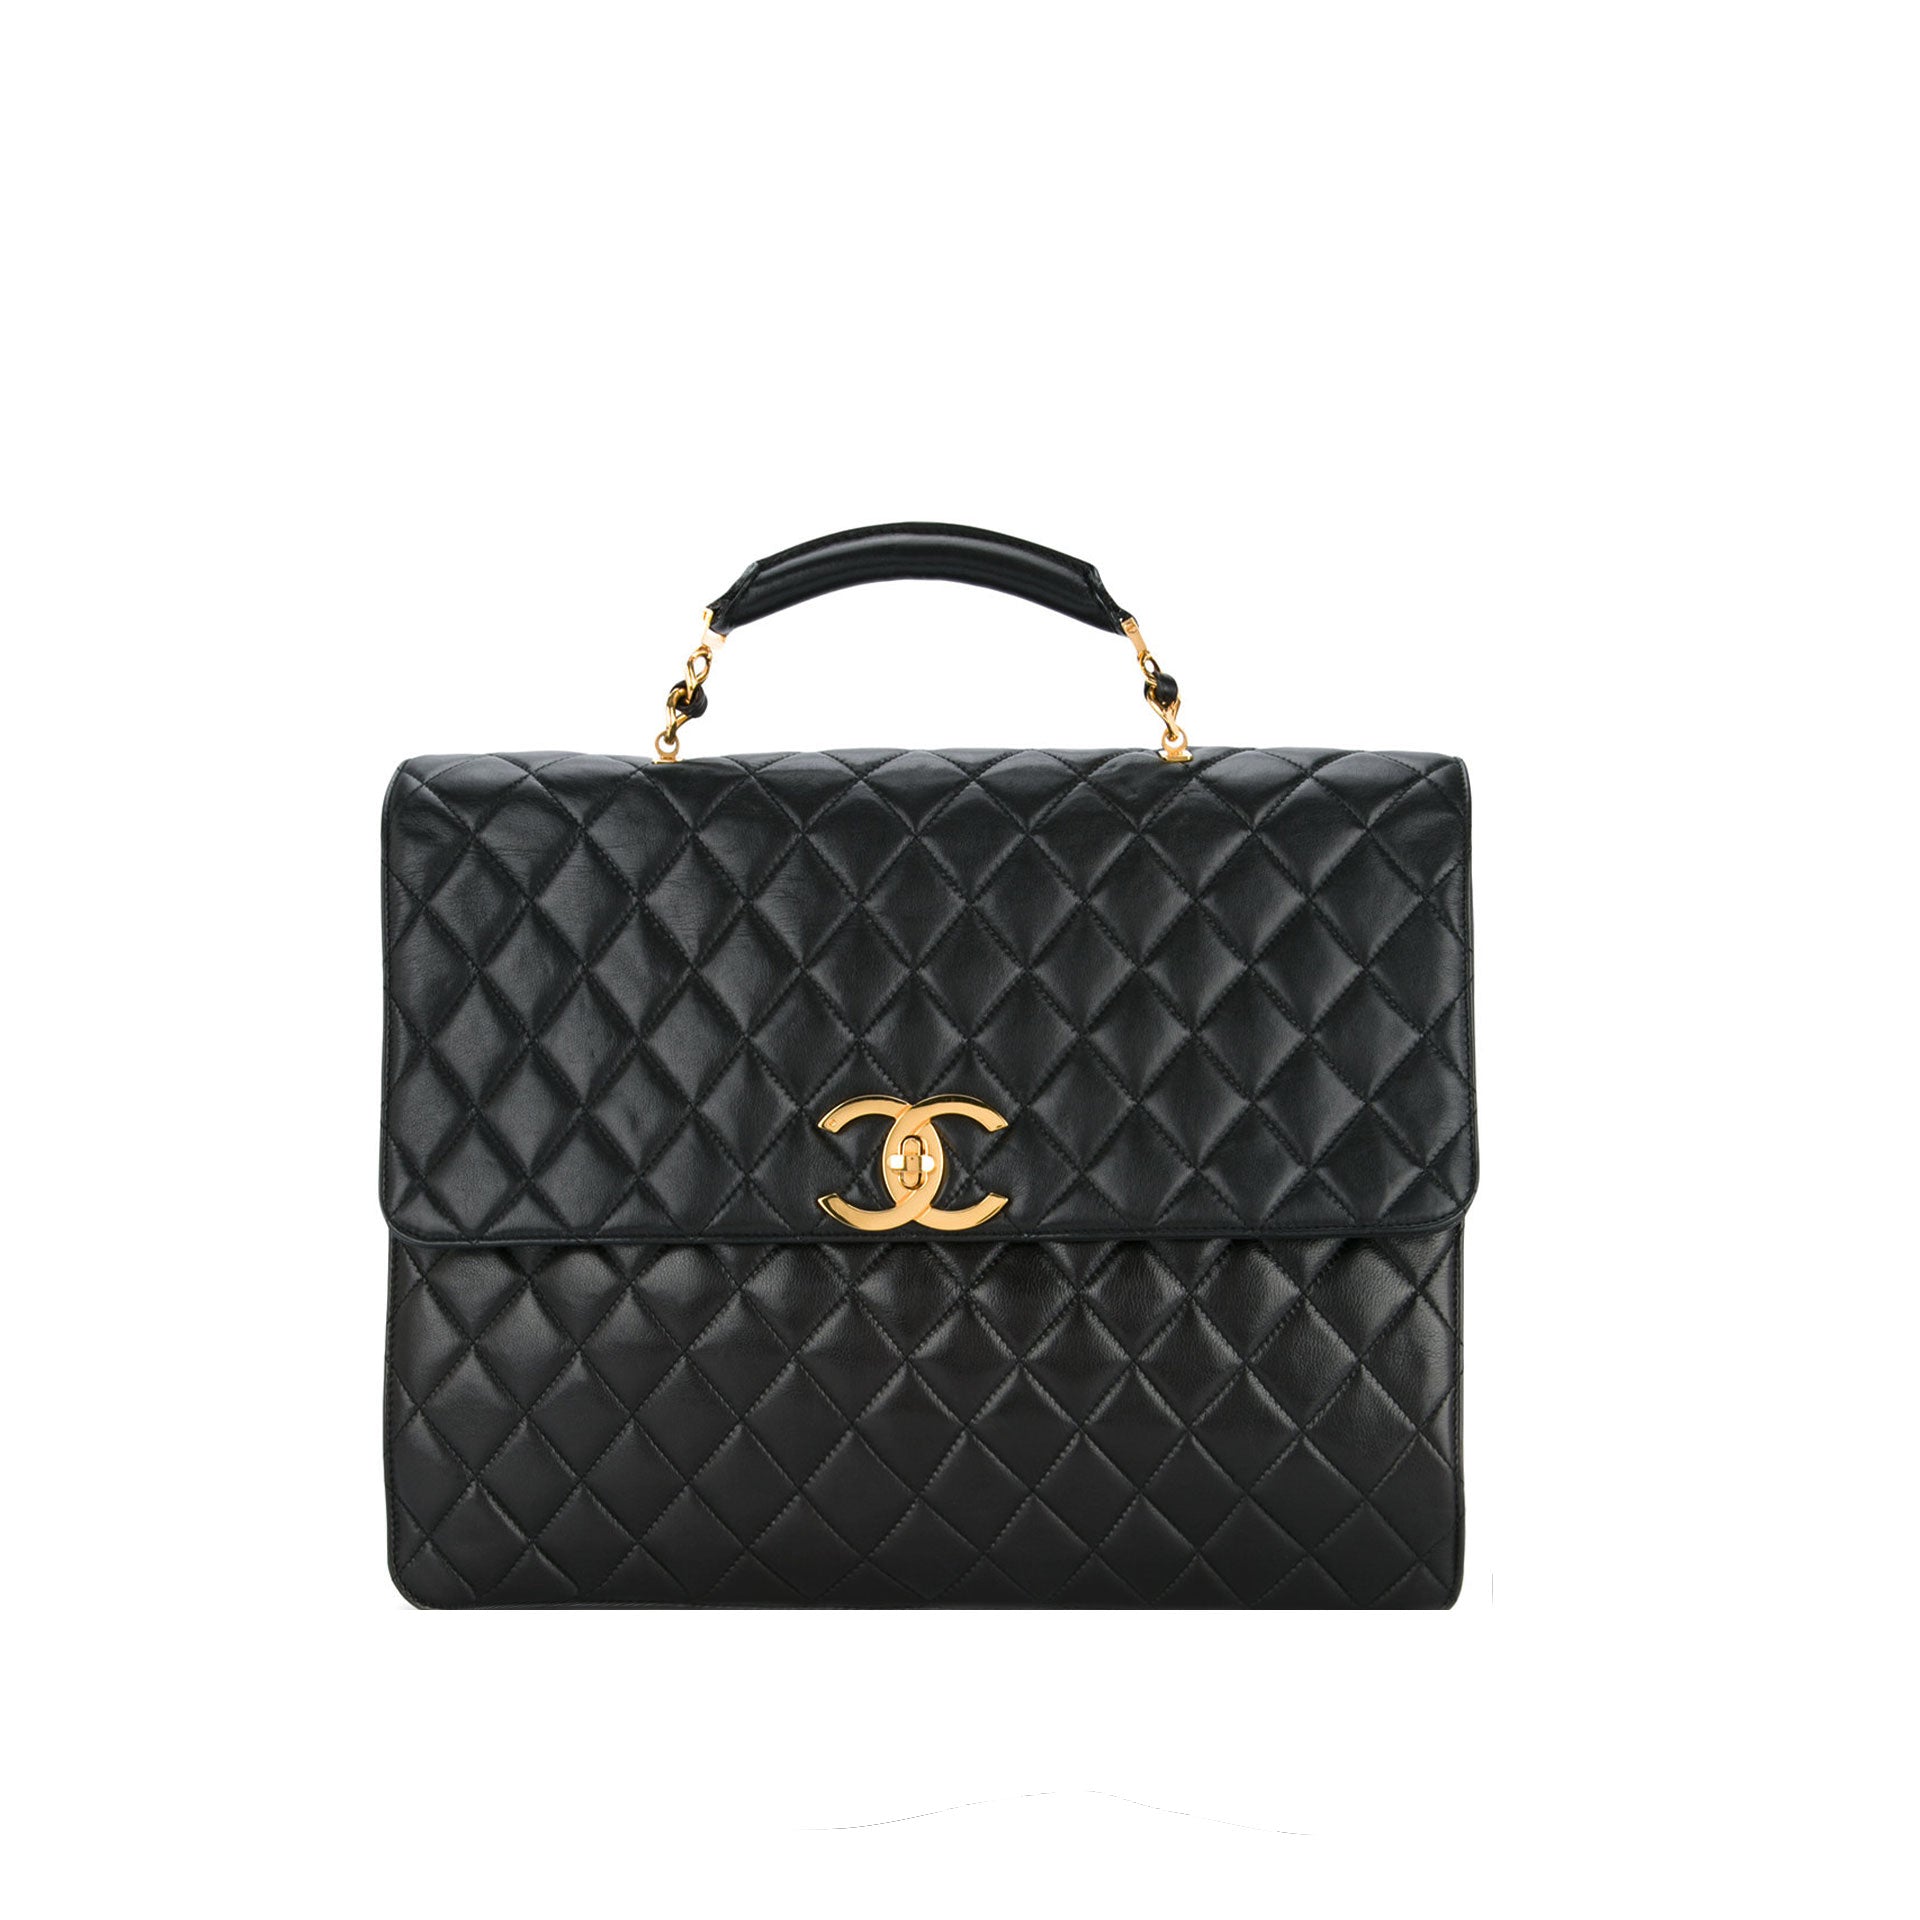 Impossible-to-Find Chanel Handbags Are House of Carver's Stock-in-Trade -  1stDibs Introspective